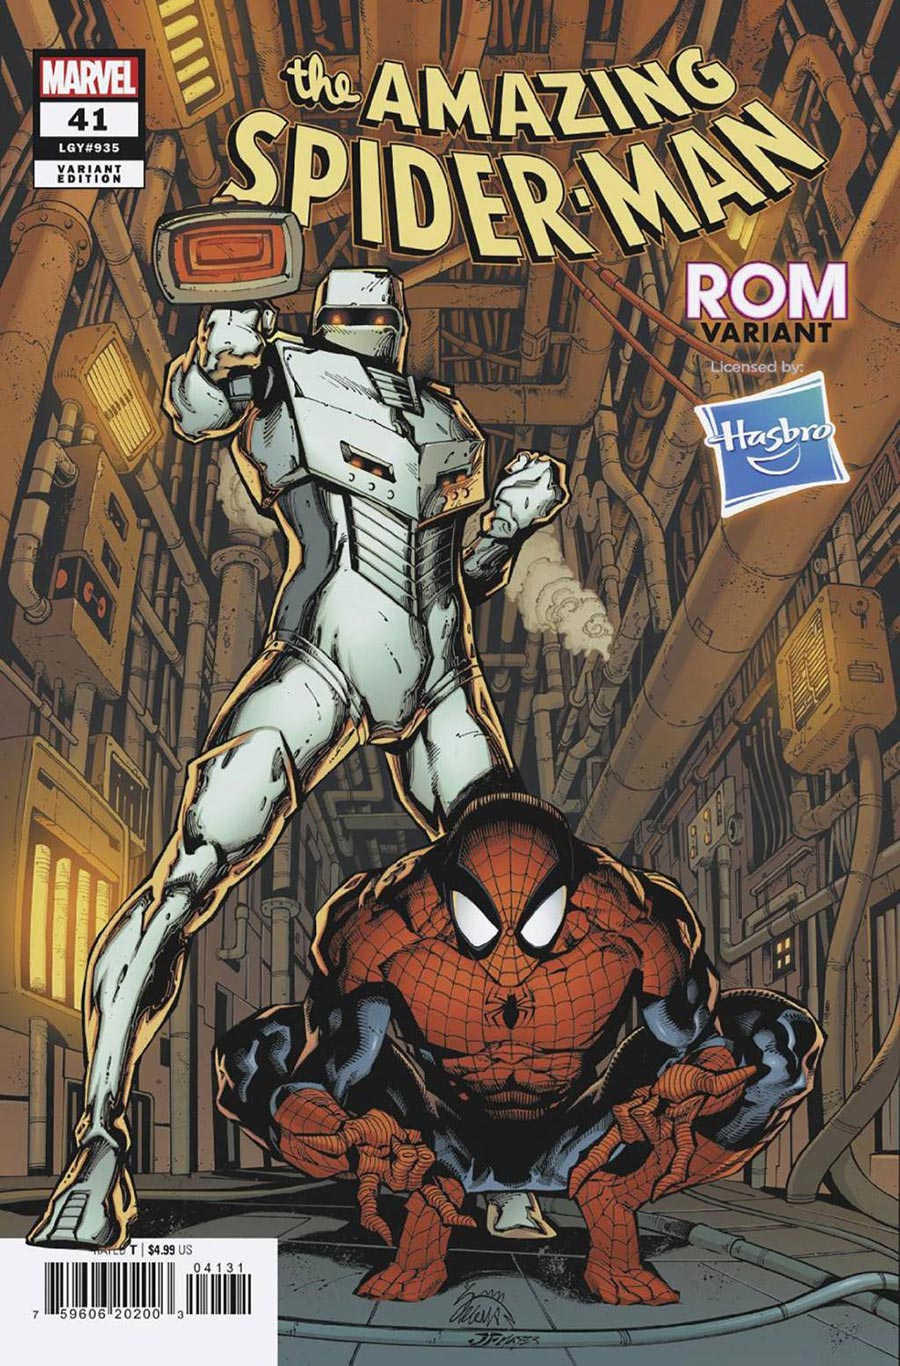 Amazing Spider-Man Vol 6 #41 Cover C Variant Ryan Stegman Rom Cover (Gang War Tie-In)